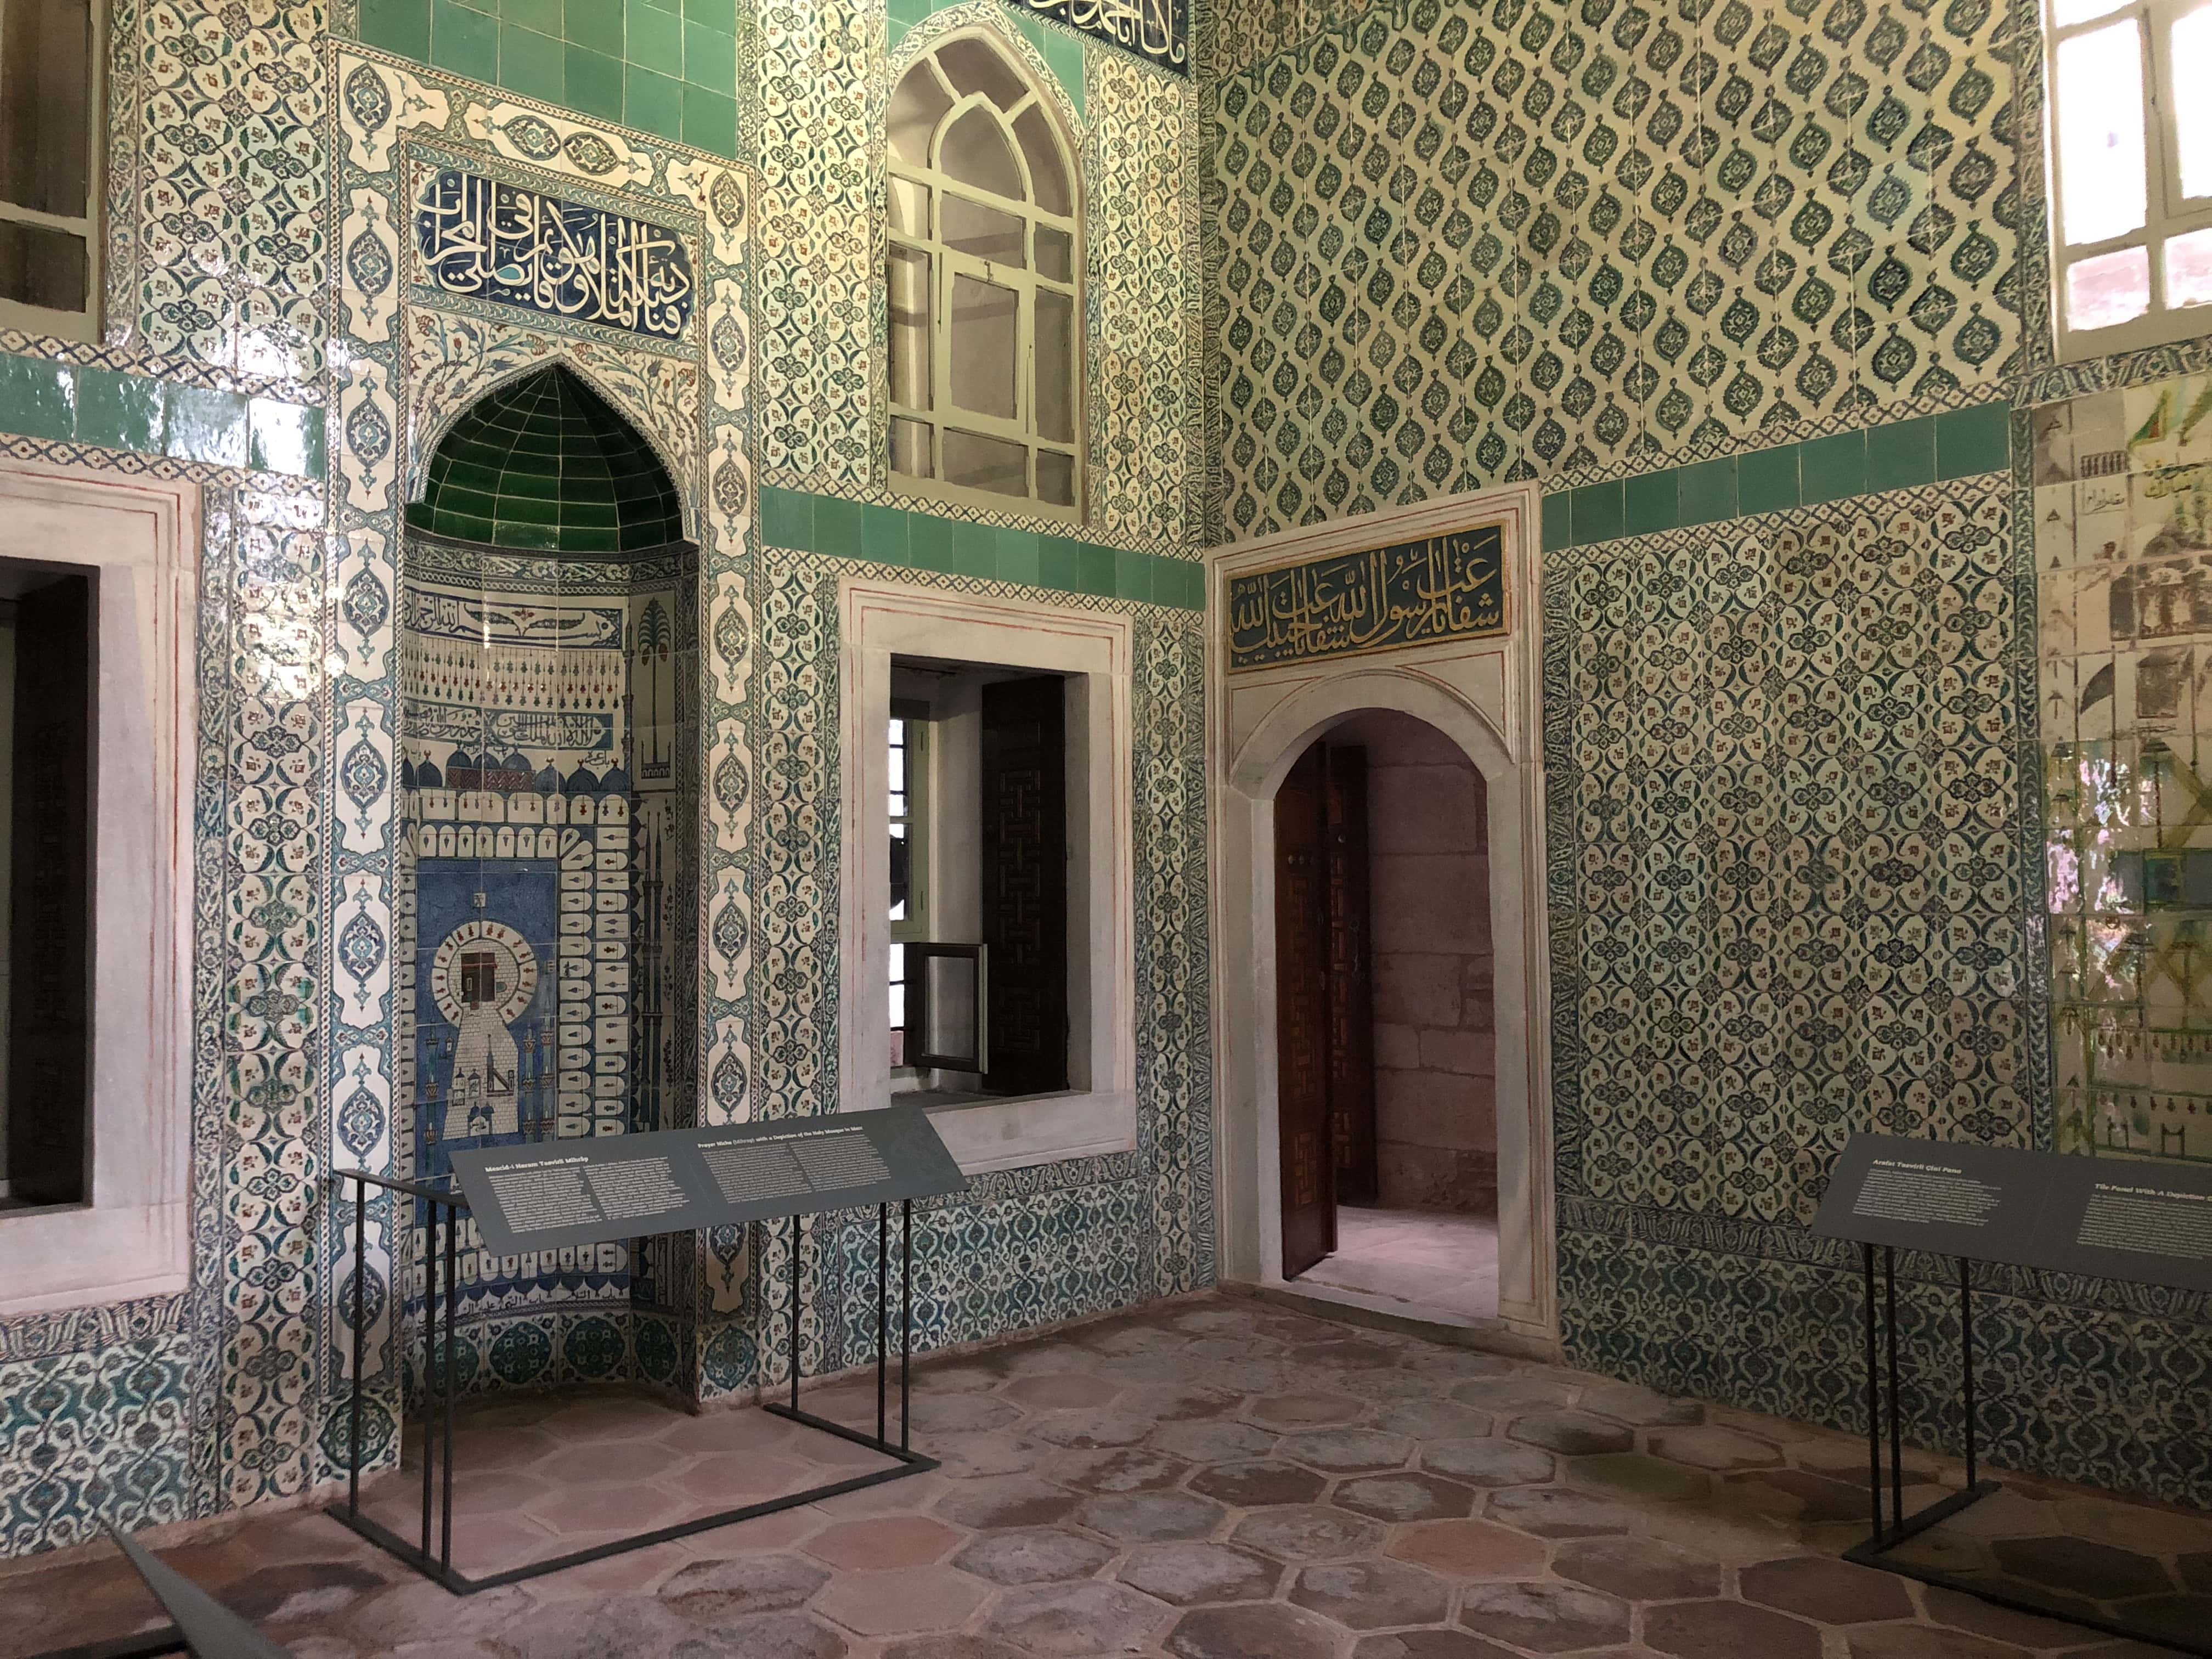 Mosque of the Black Eunuchs in the Imperial Harem at Topkapi Palace in Istanbul, Turkey